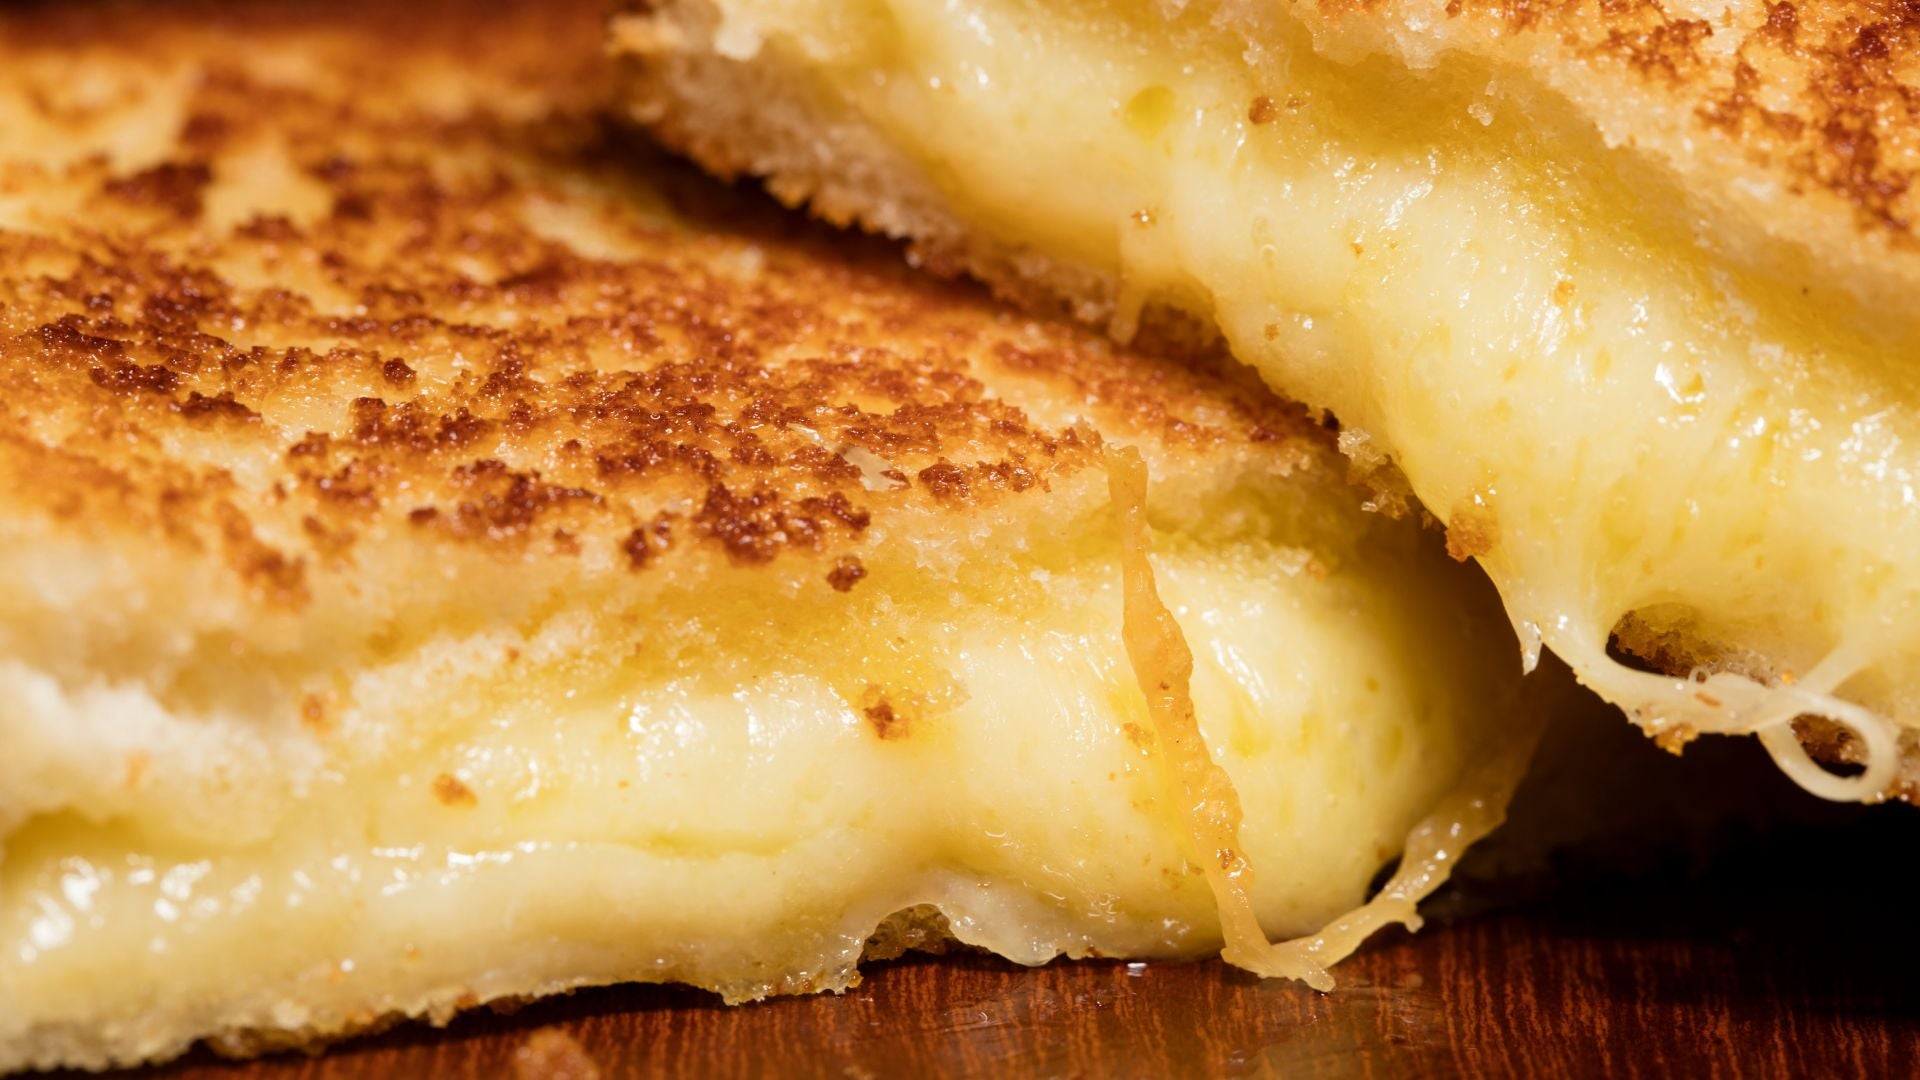 How to Use ToutEpis to Elevate Your Grilled Cheese Sandwiches